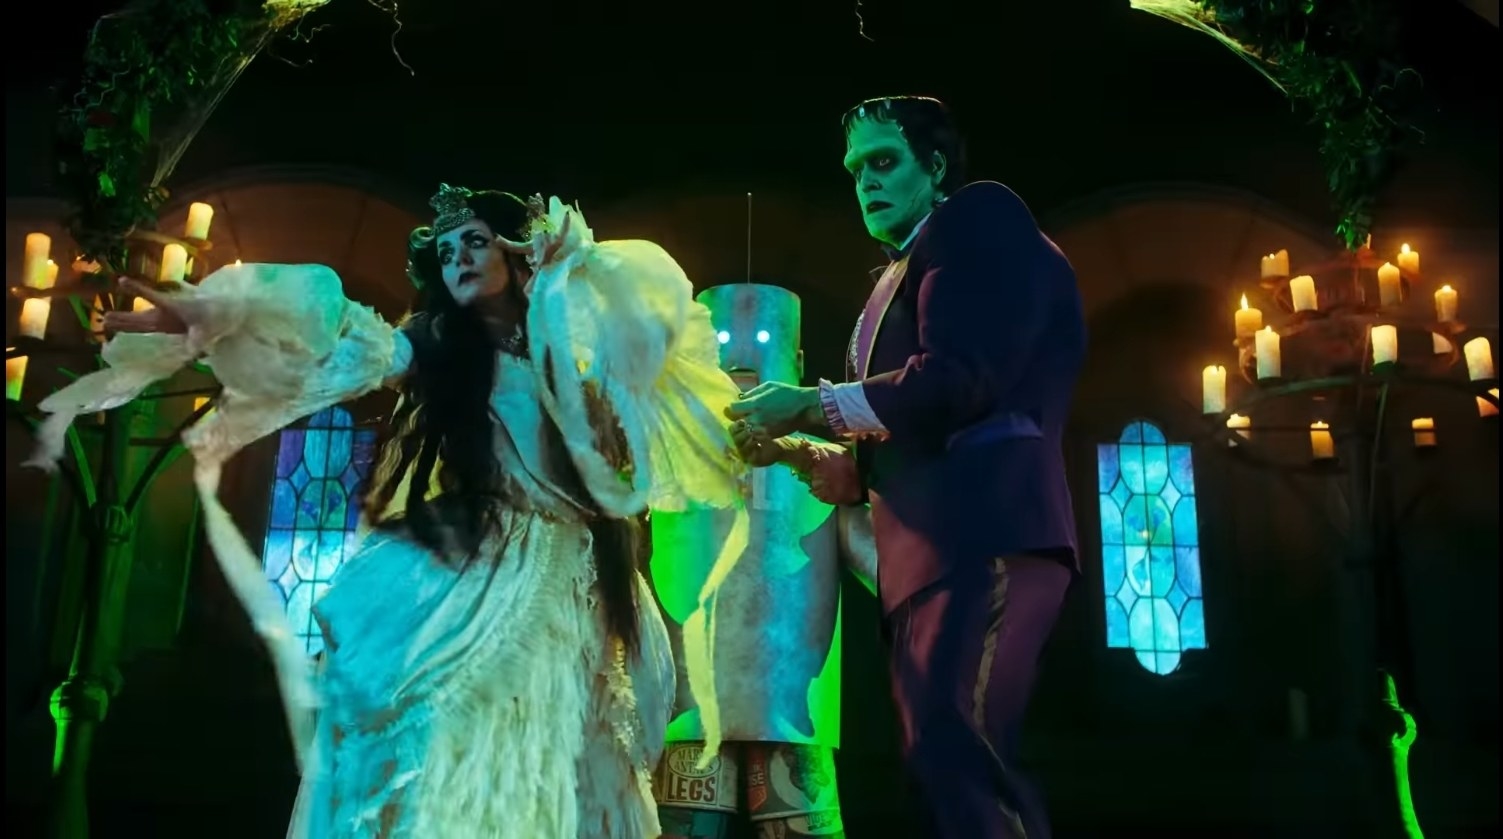 A wedding between Lily and Herman Munster gets especially freaky in &quot;The Munsters&quot;